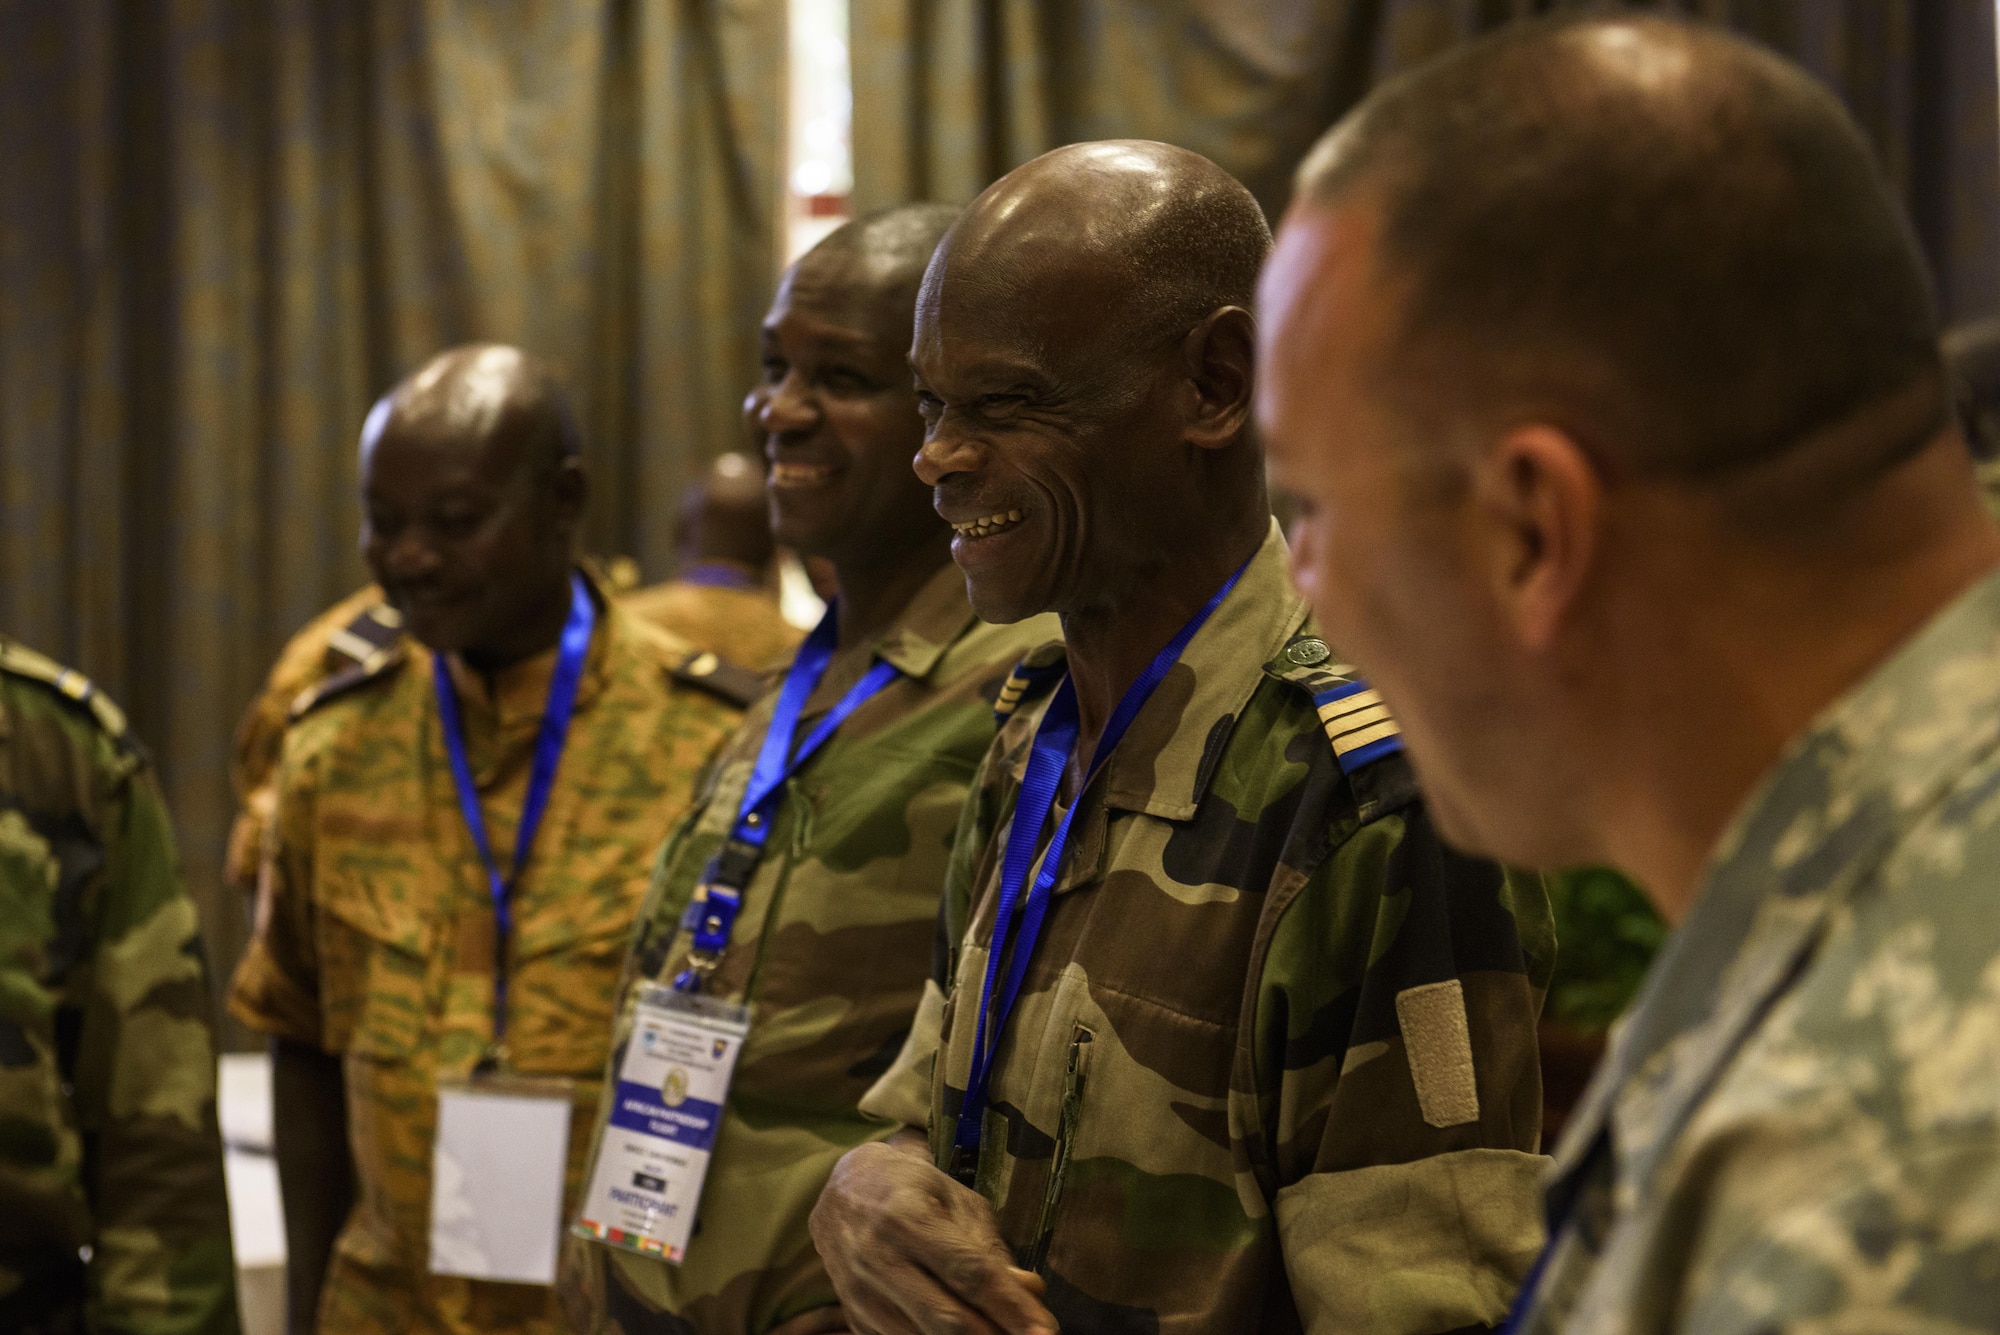 African Partnership Flight participants take a short break in between class discussions in Ouagadougou, Burkina Faso, April 18, 2017. APF in Burkina Faso hosted participants from Chad, Mali, Mauritania, Niger, Cote d’Ivoire and Morocco to help strengthen relationships and share best practices. (U.S. Air Force photo by Staff Sgt. Jonathan Snyder)